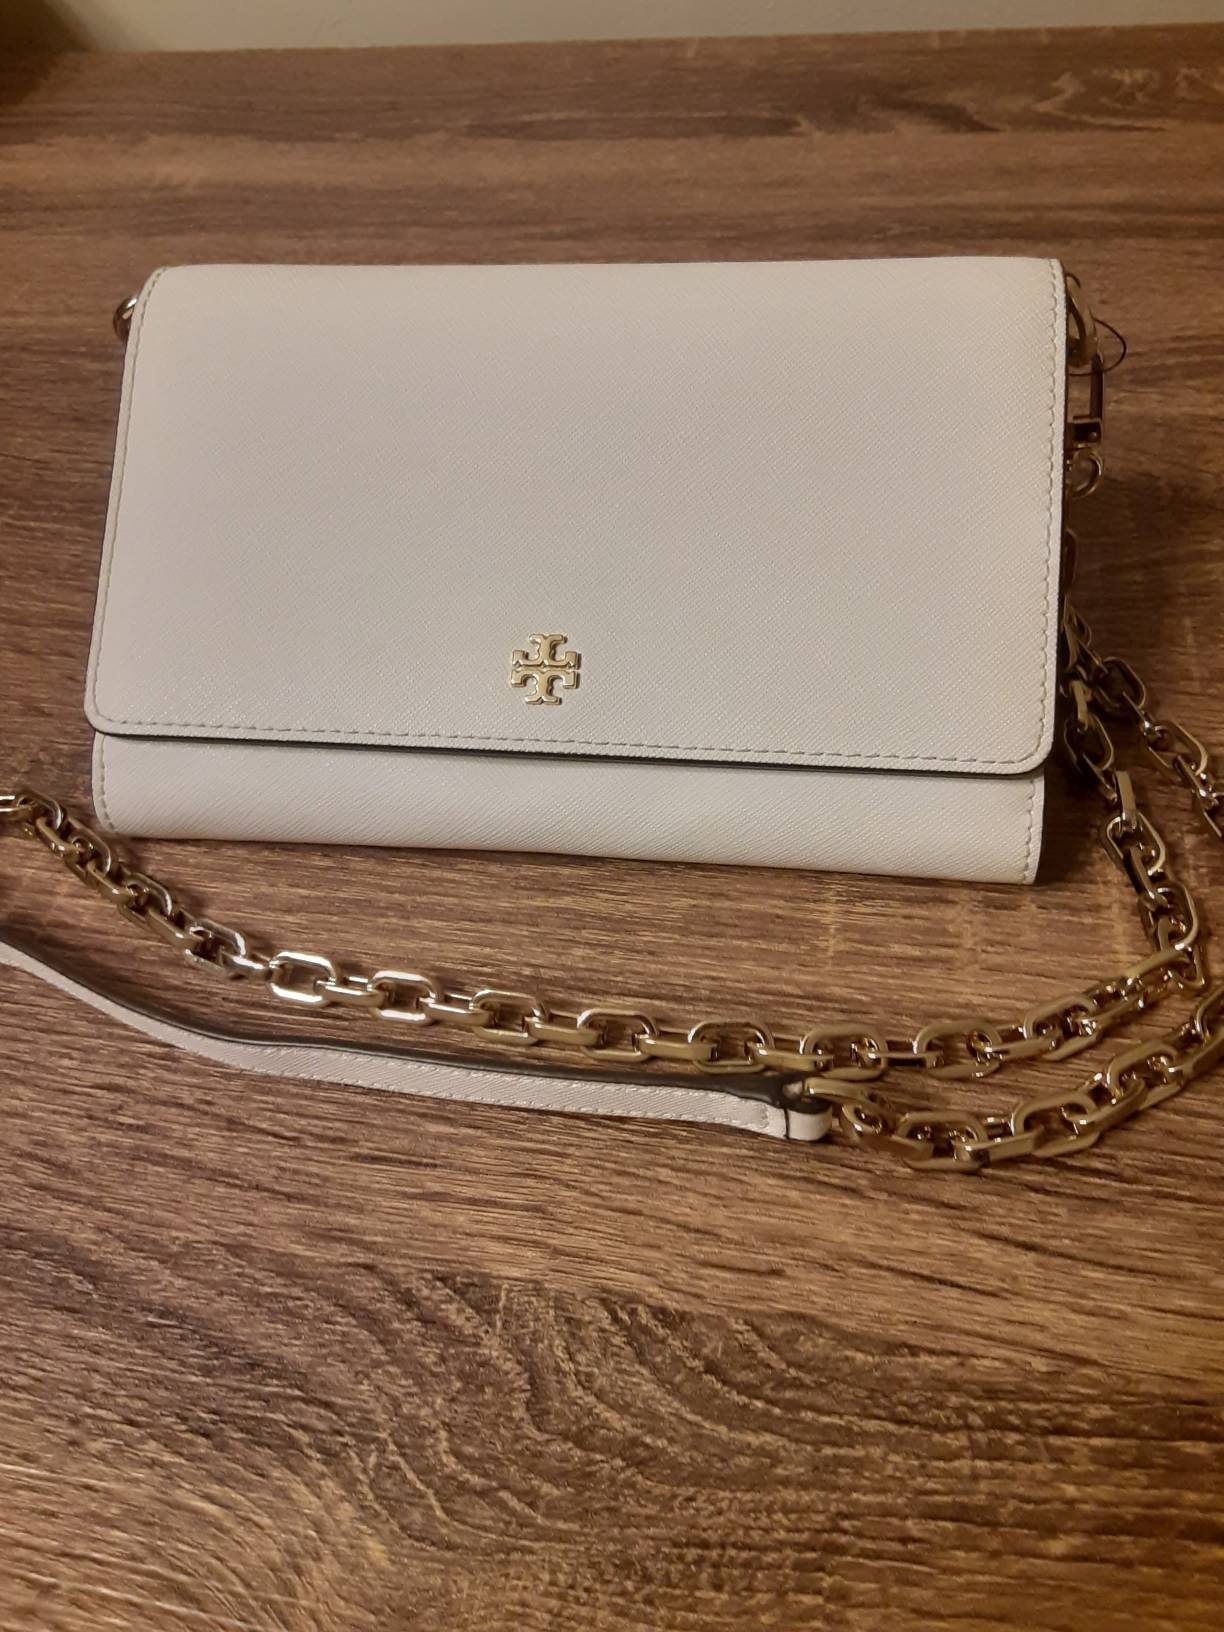 Tory Burch Emerson Chain Wallet Leather Cross Body France